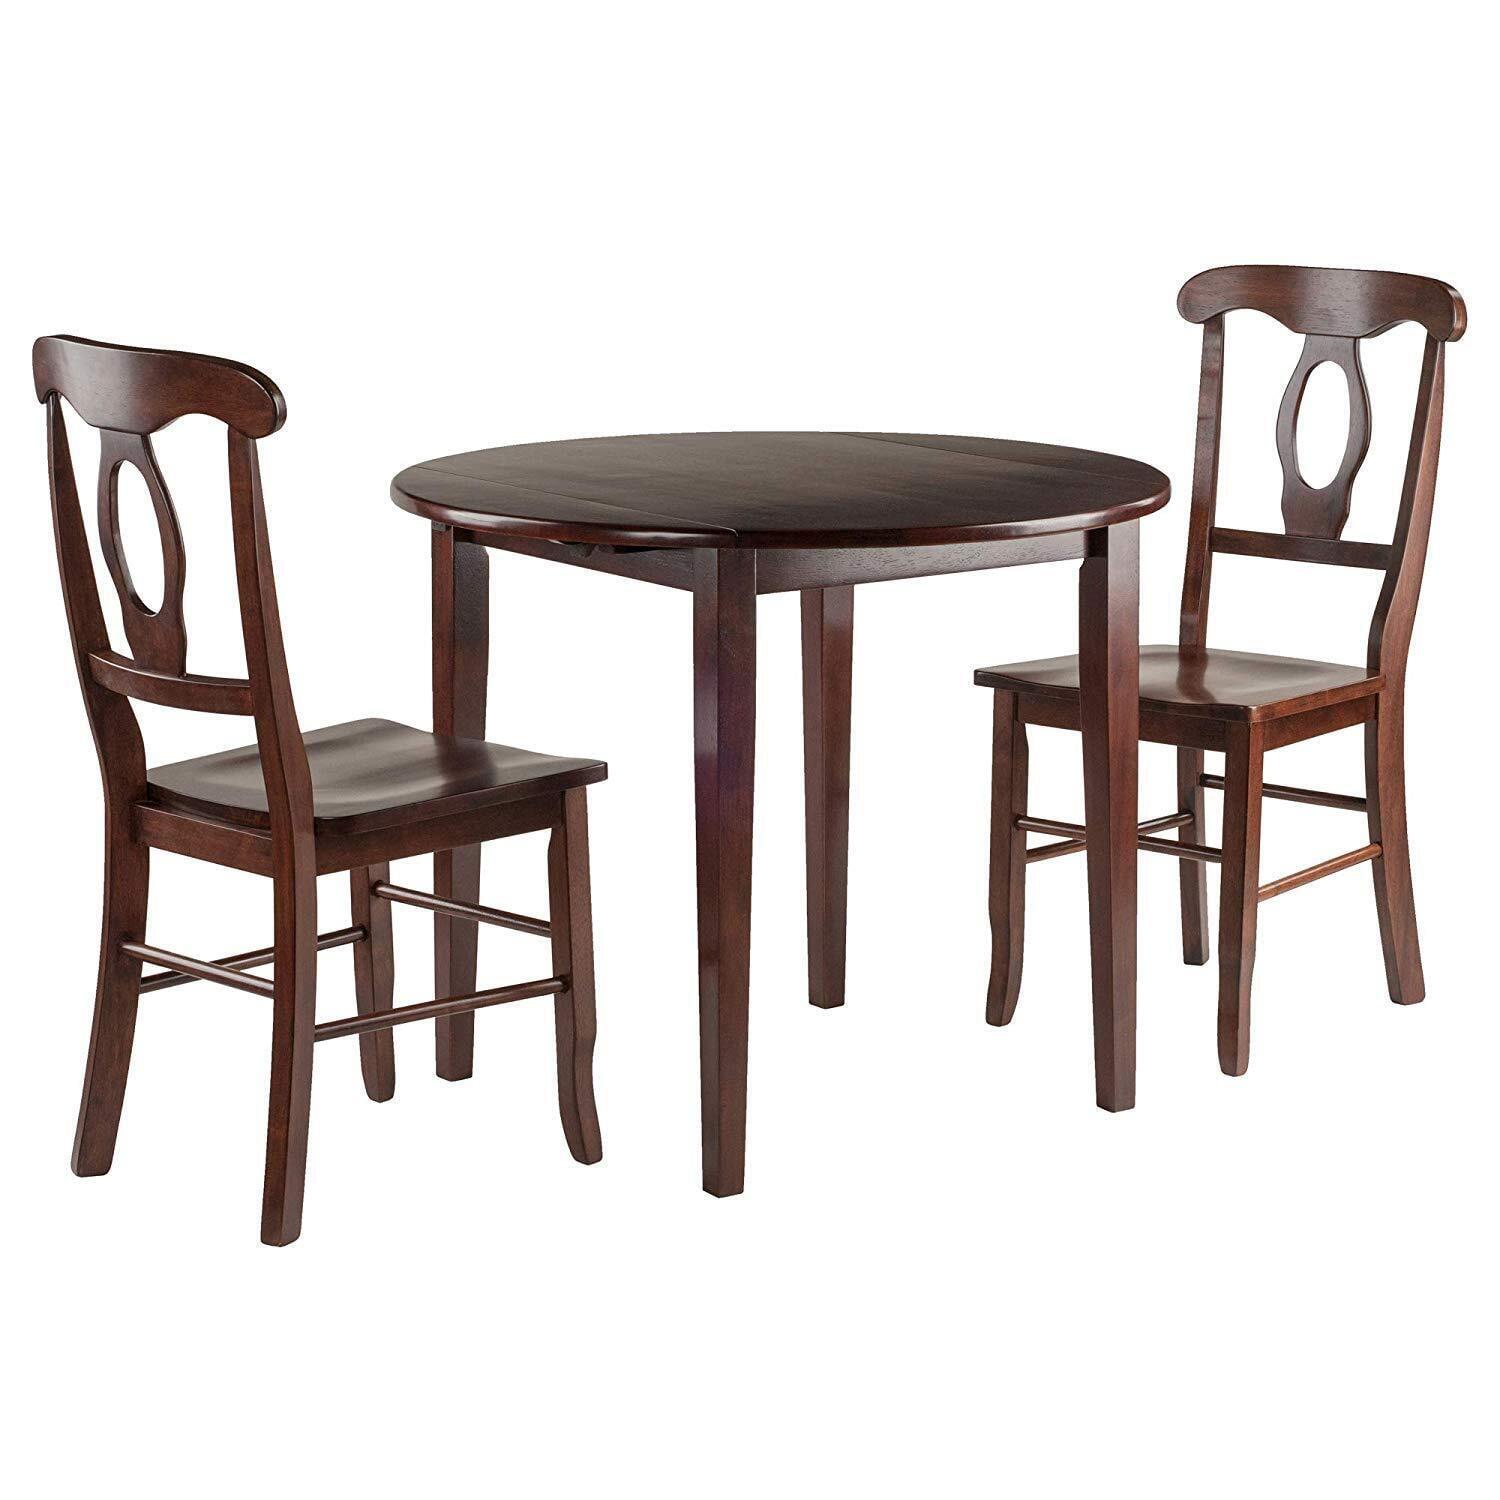 Walnut Finish Transitional Drop Leaf Dining Set with Keyhole Back Chairs